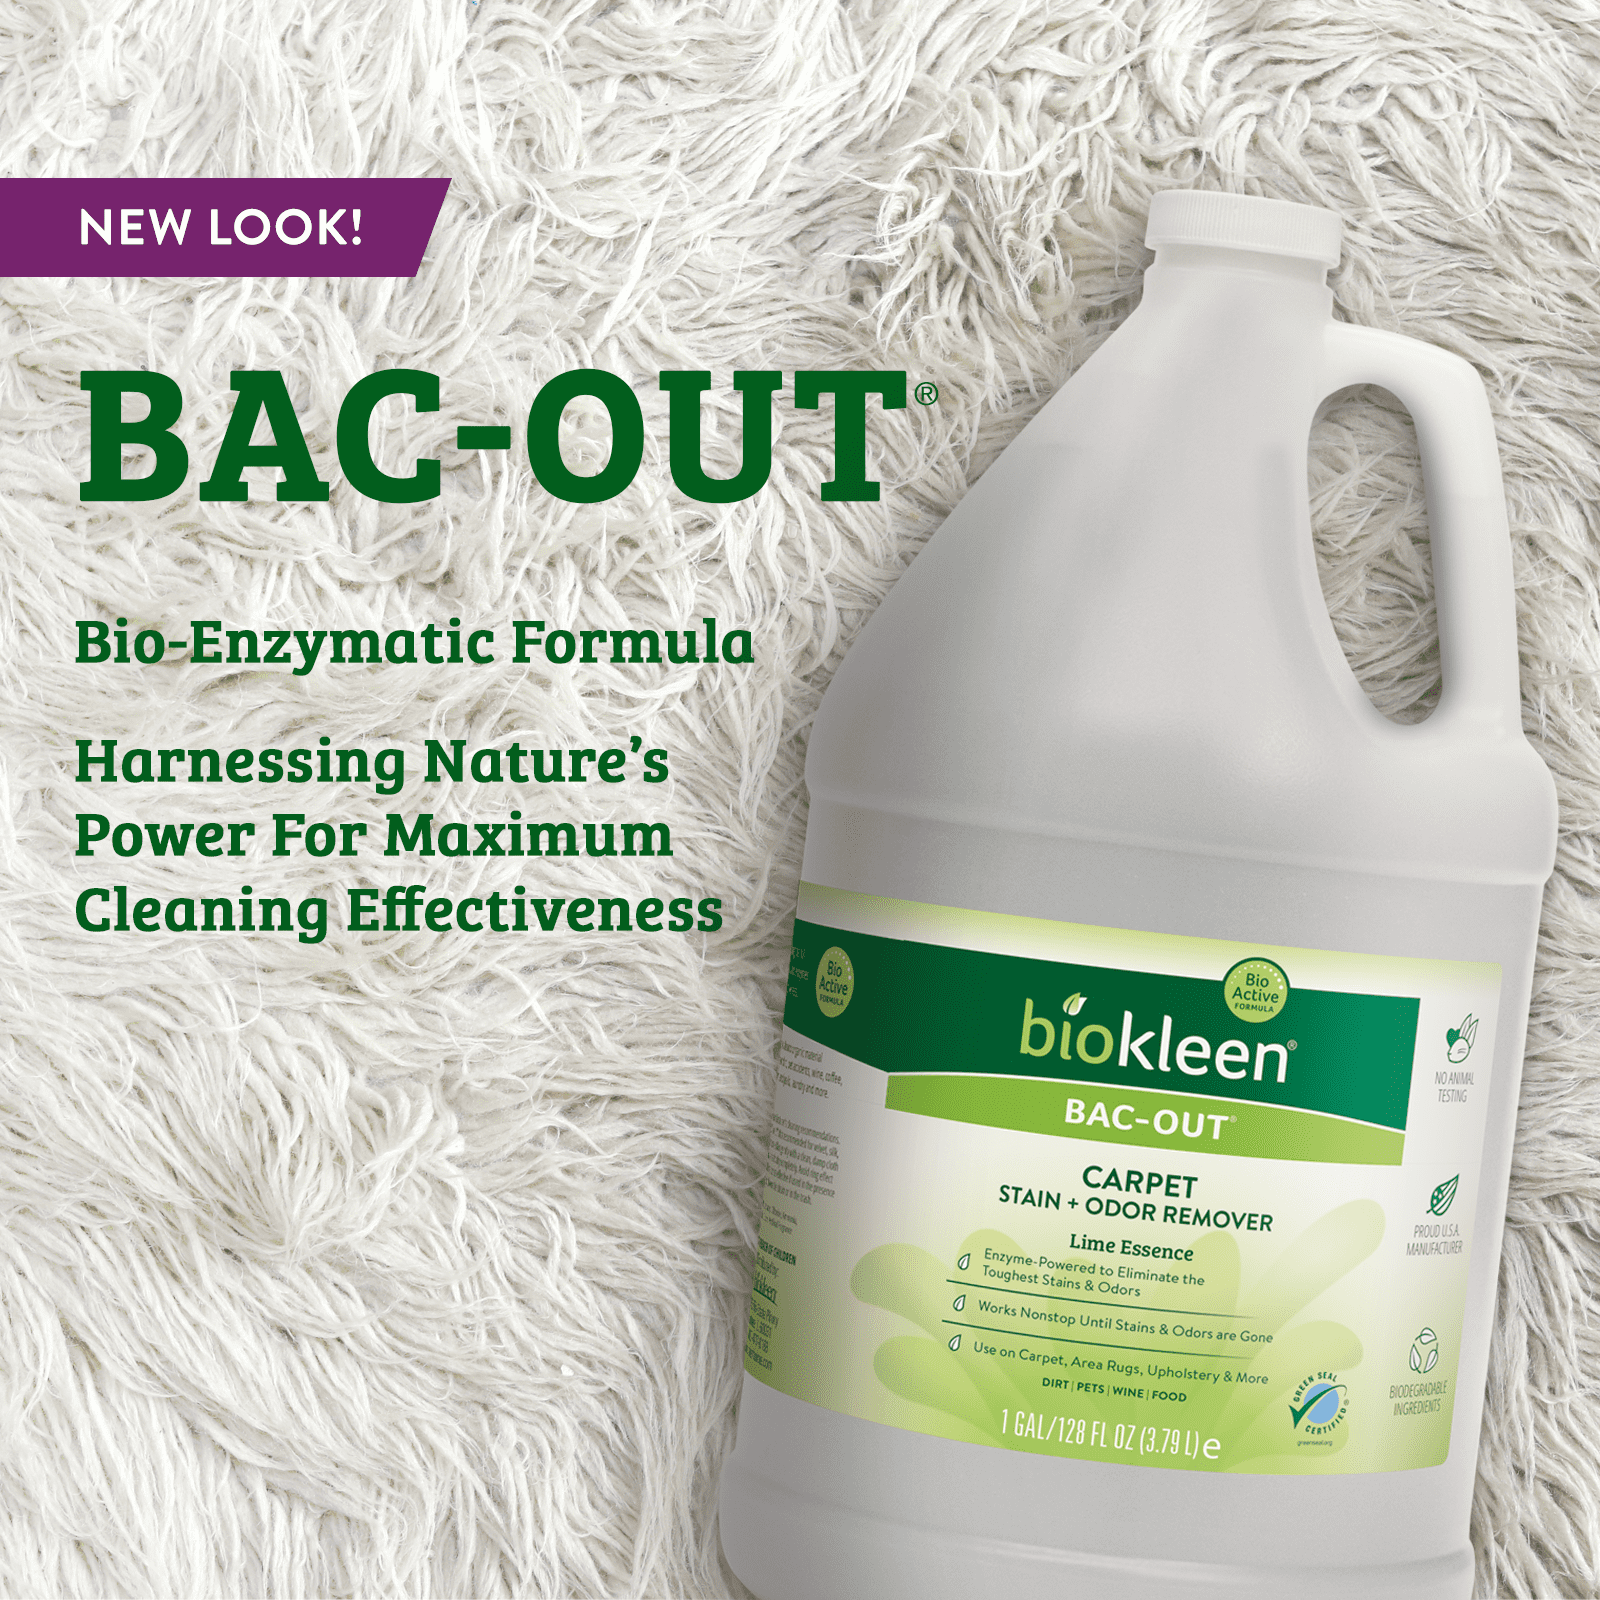 Biokleen Bac-Out Enzymatic Odor & Stain Remover for Pet Stains